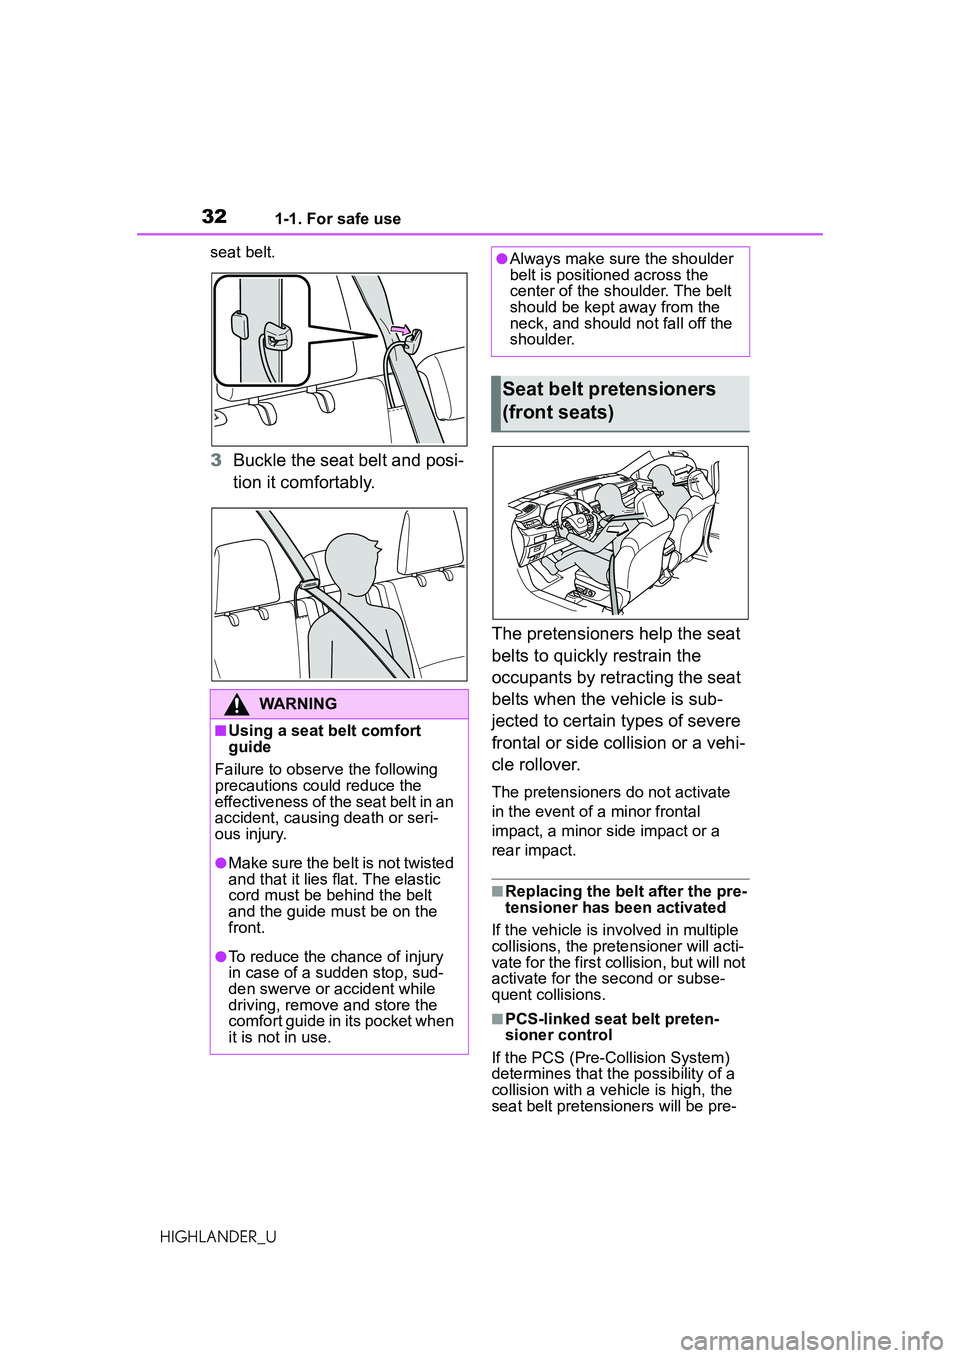 TOYOTA HIGHLANDER 2021  Owners Manual (in English) 321-1. For safe use
HIGHLANDER_Useat belt.
3
Buckle the seat belt and posi-
tion it comfortably.
The pretensioners help the seat 
belts to quickly restrain the 
occupants by retracting the seat 
belts